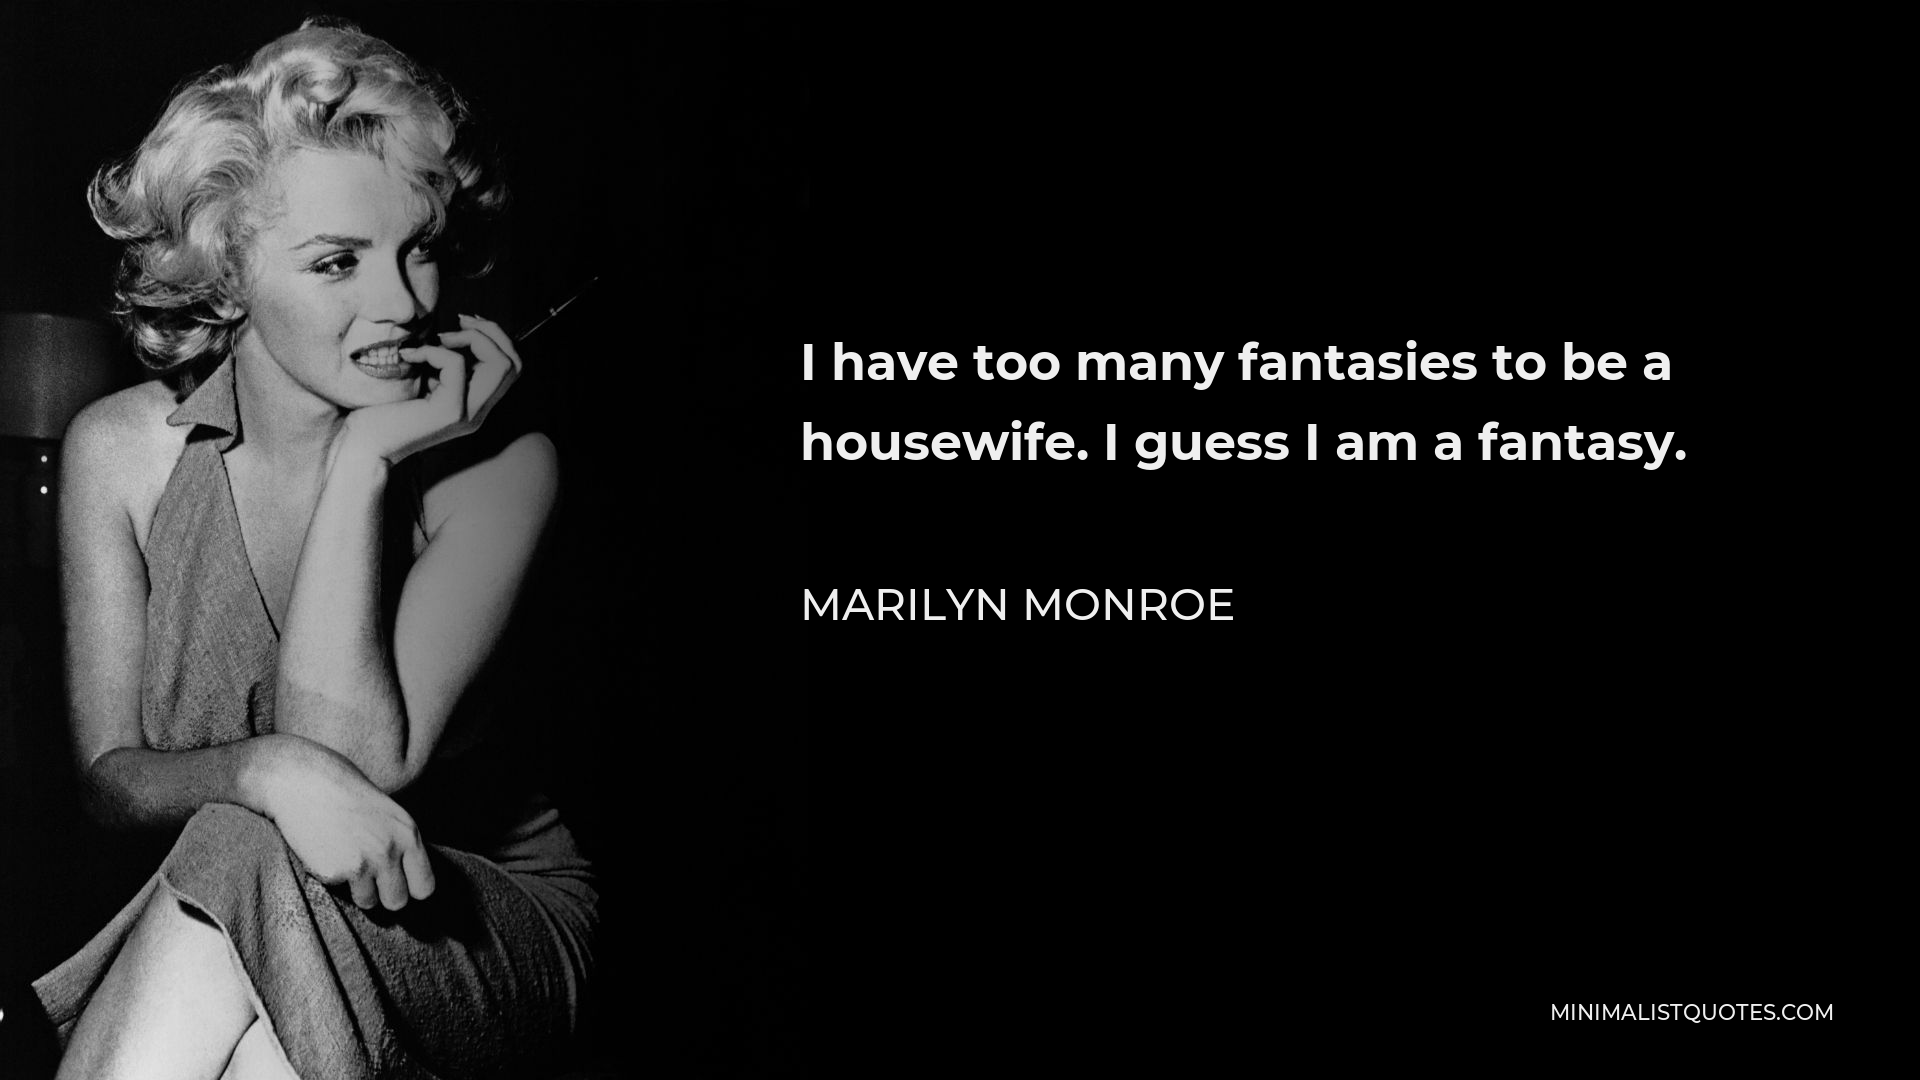 Marilyn Monroe Quote - I have too many fantasies to be a housewife. I guess I am a fantasy.